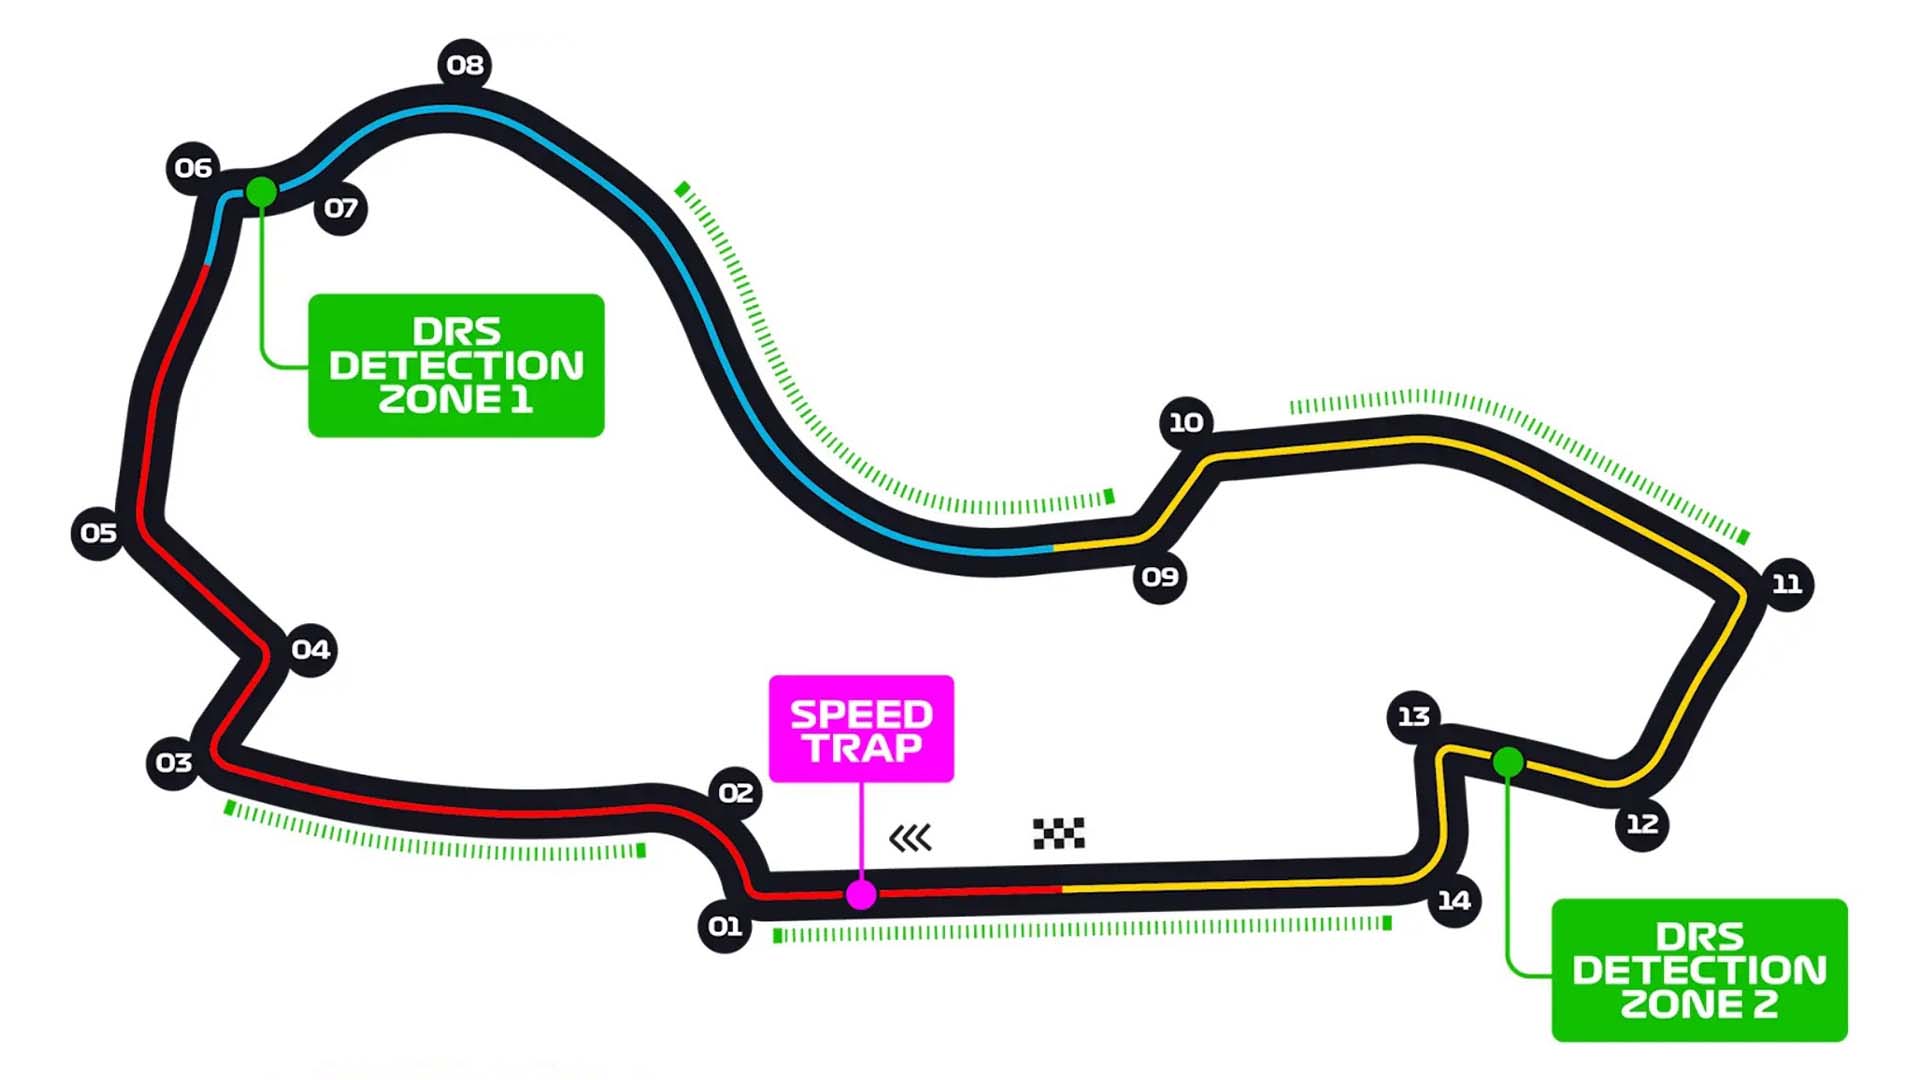 F1s Updated Australian GP Track Has Four DRS Zones for Lots of Passing